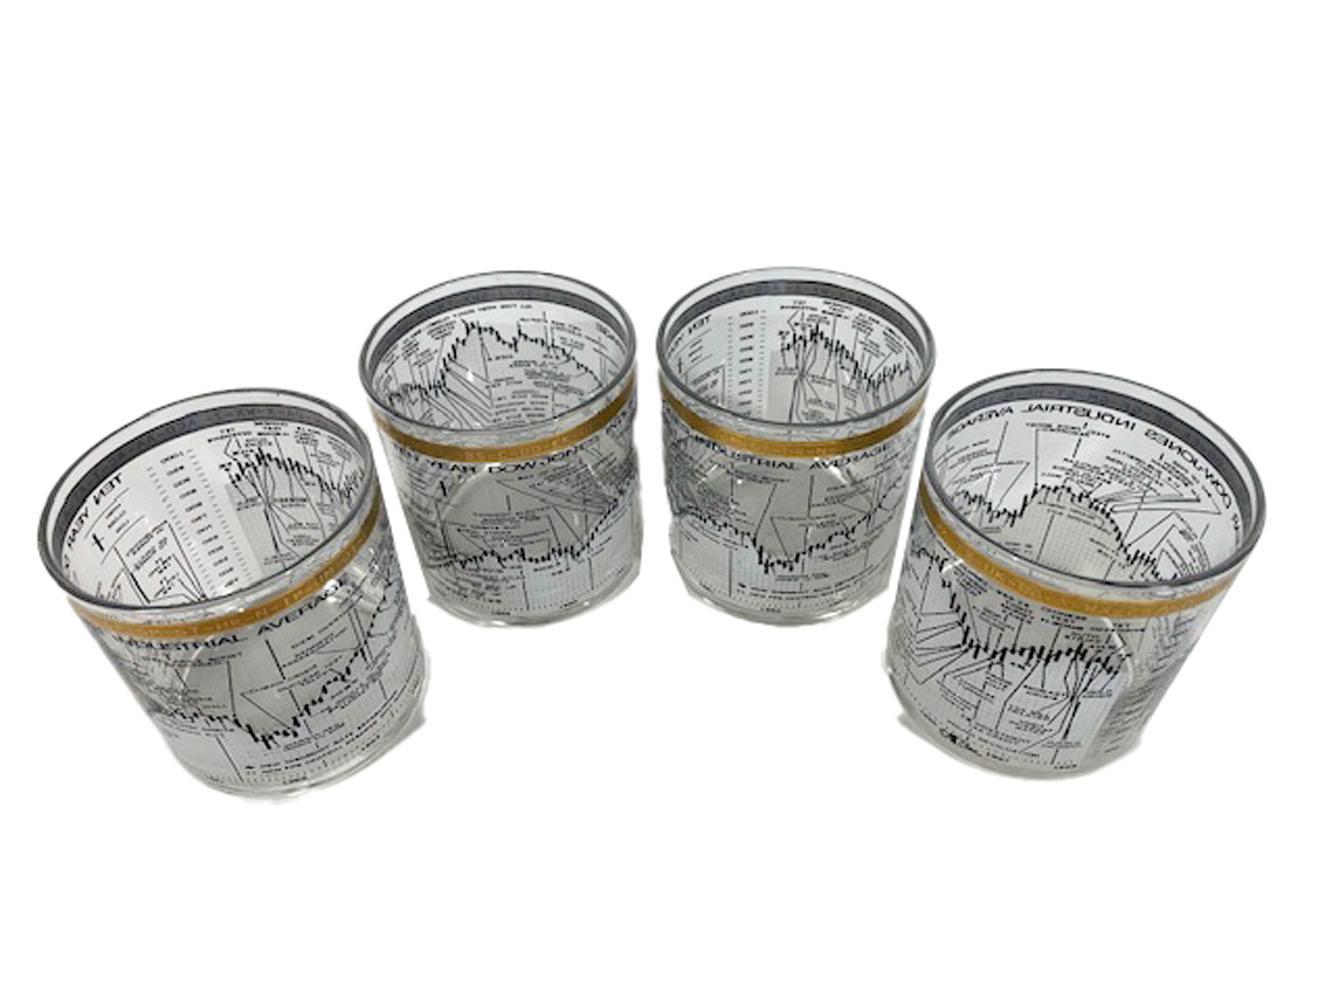 Set of four Ten Year Dow-Jones Industrial Average rocks glasses for the period 1958-1968 with a black and white enamel graph of the market's activity along with events that effected the changes, below a 22k gold band embossed with stock symbols.